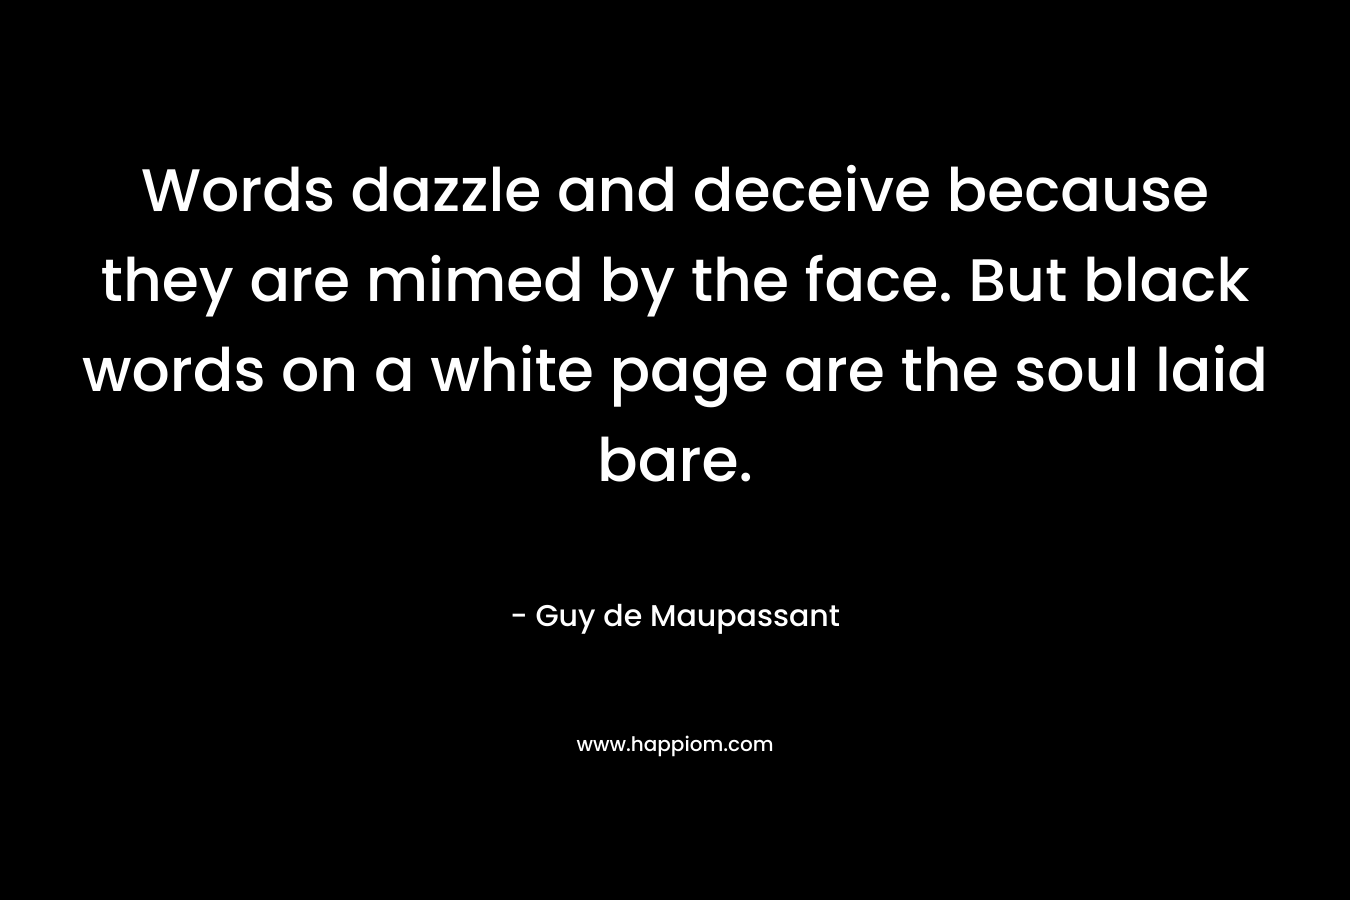 Words dazzle and deceive because they are mimed by the face. But black words on a white page are the soul laid bare. – Guy de Maupassant